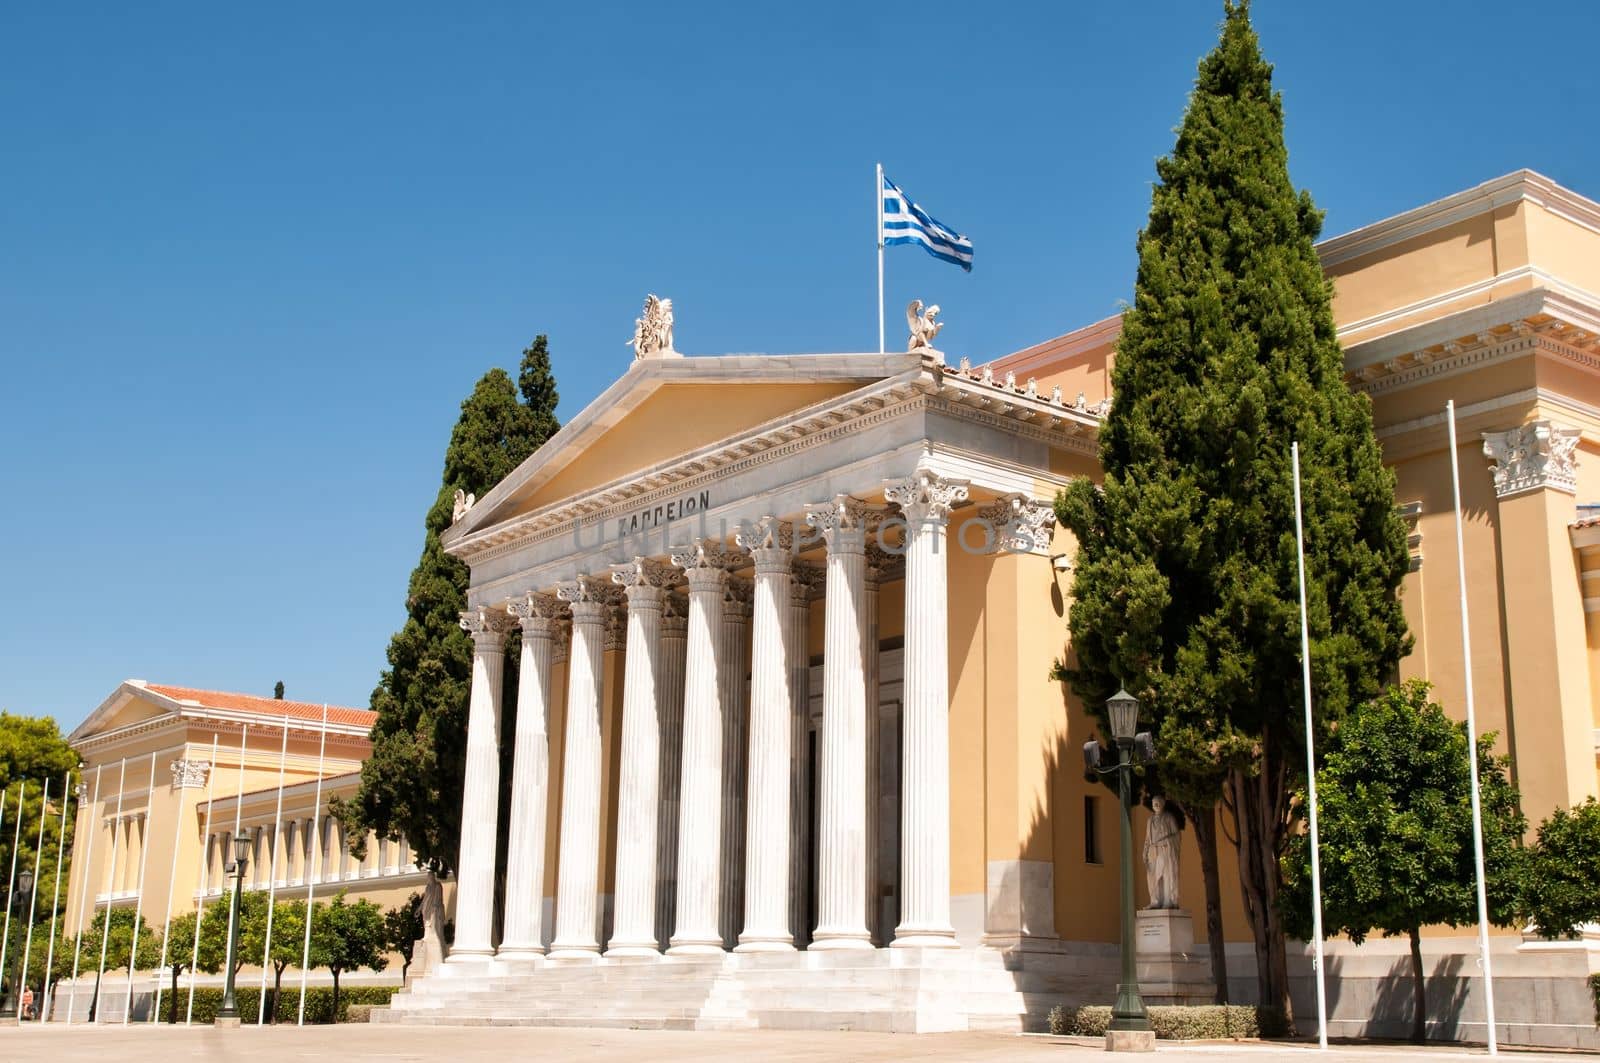 The Zappeion building in Athens by mitakag